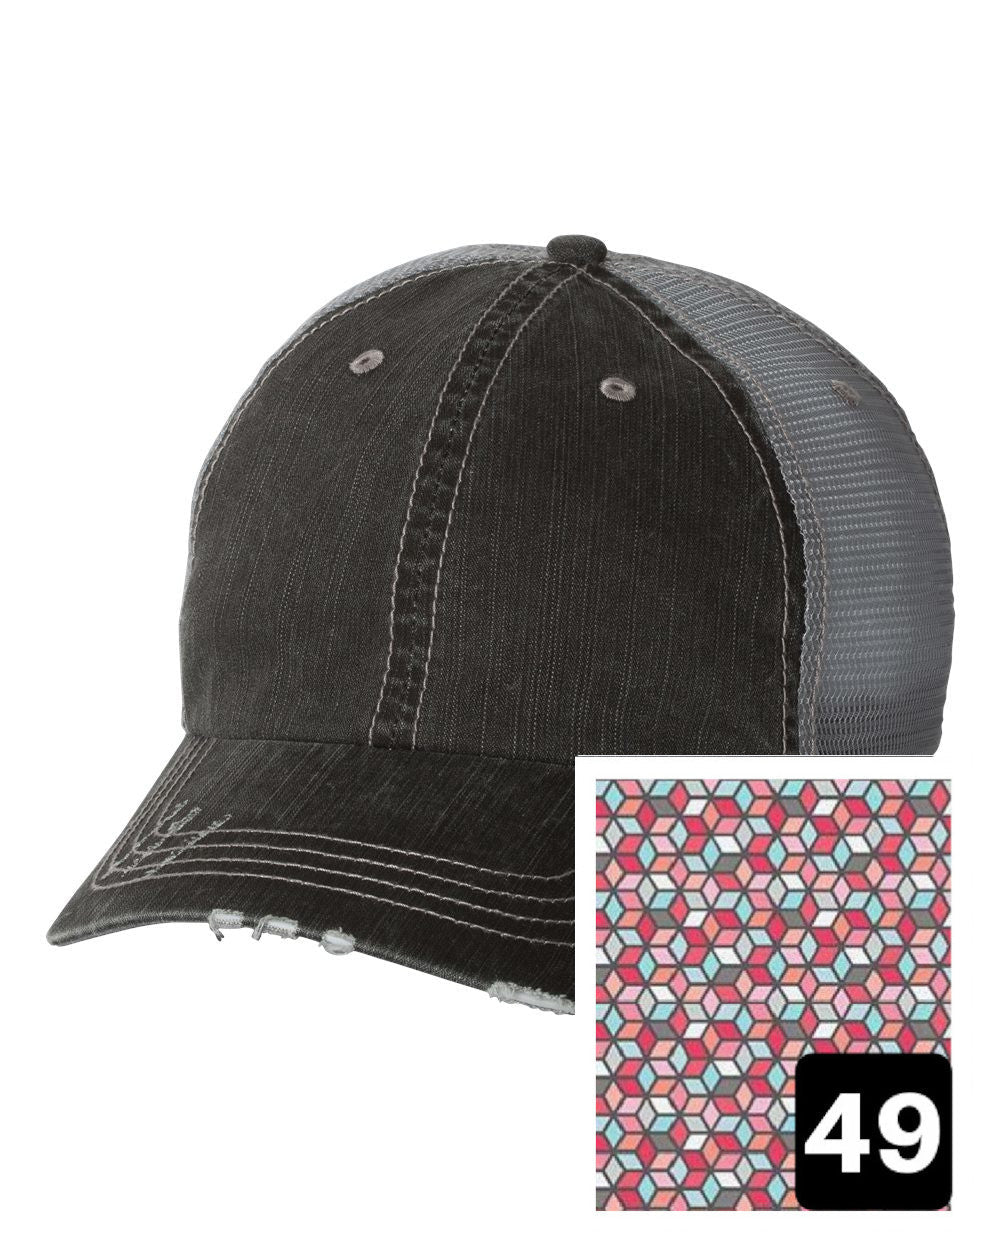 gray distressed trucker hat with black with white hatch fabric state of Connecticut